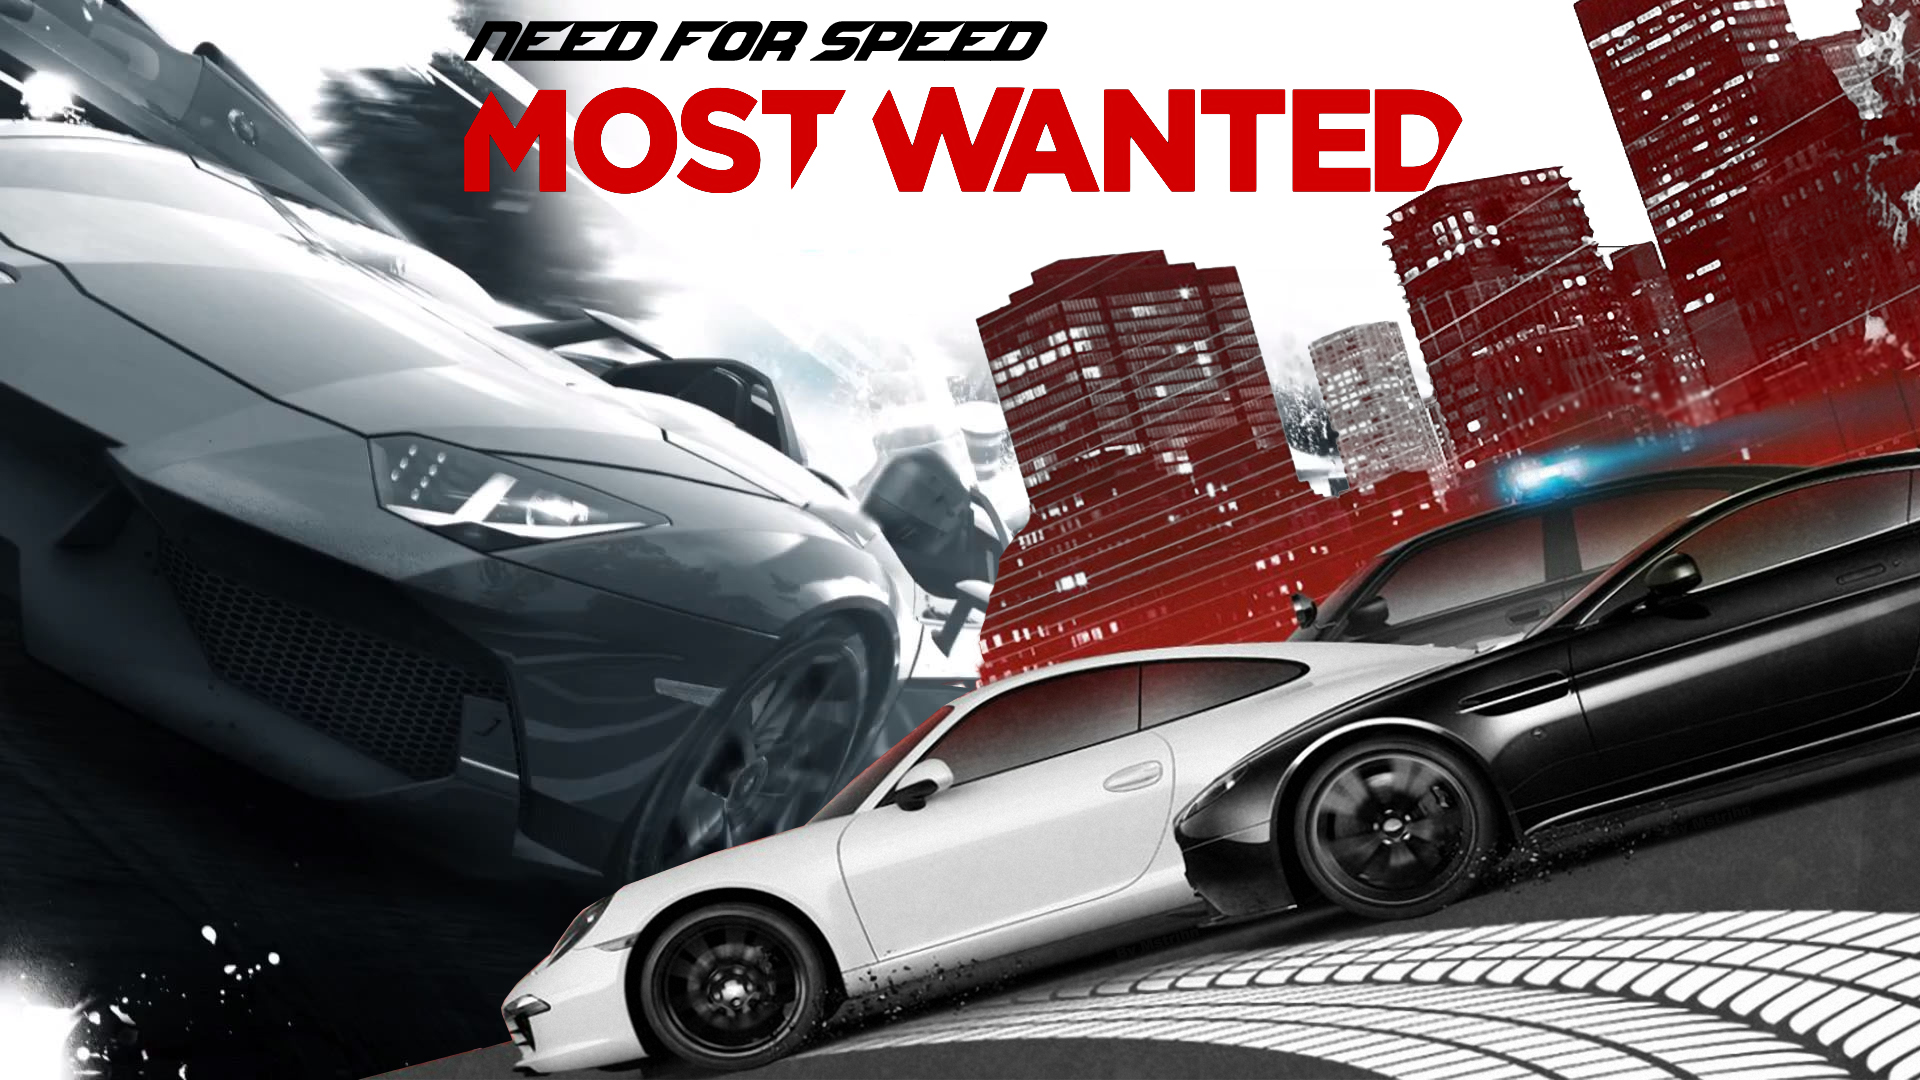 Need for Speed Most Wanted 2012 Save File Download